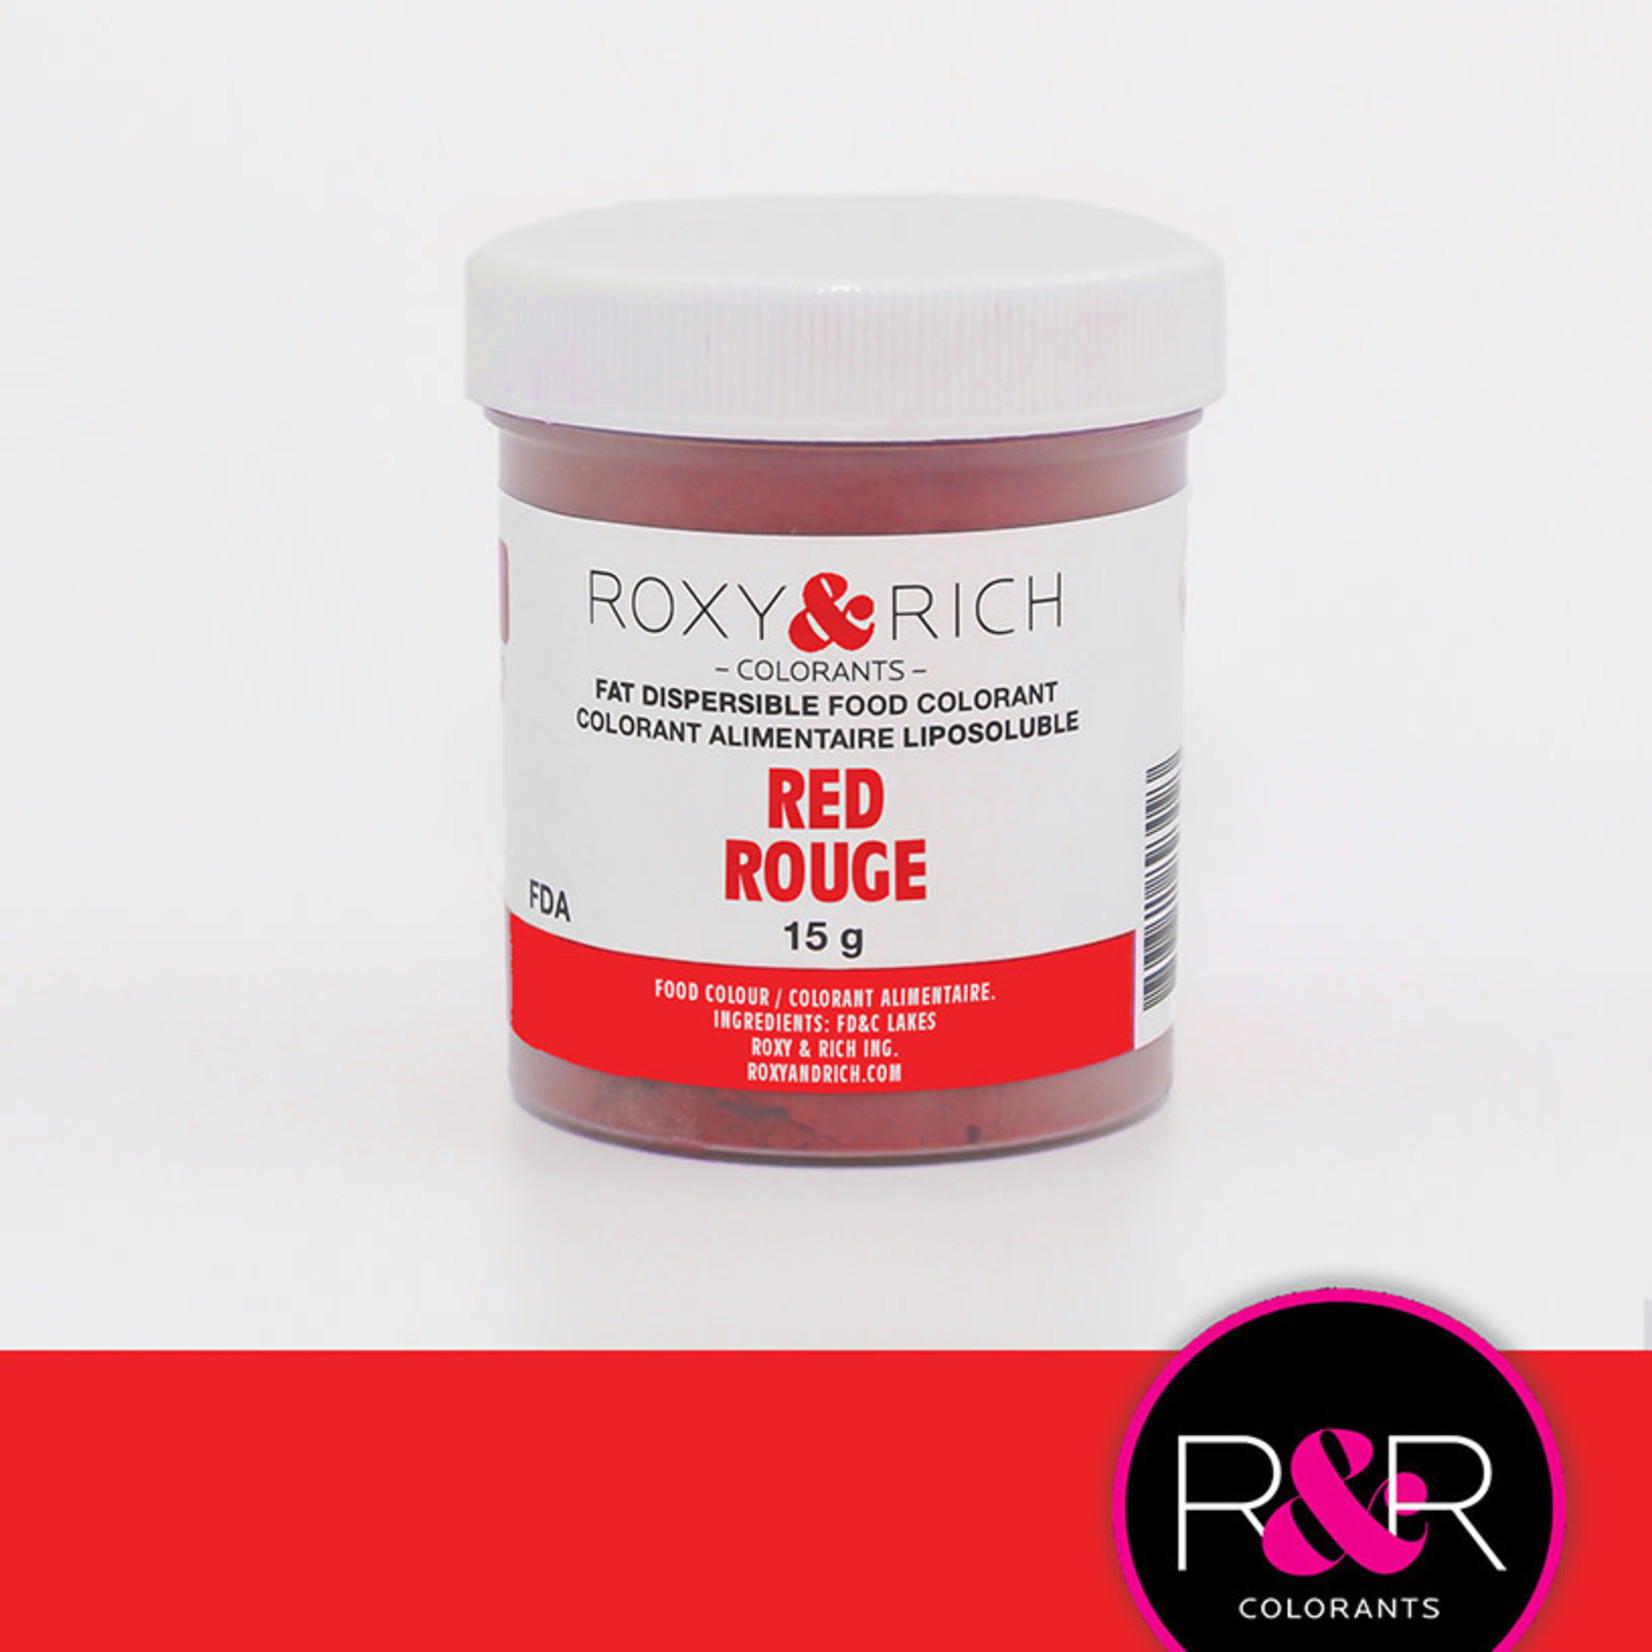 Roxy & Rich Roxy & Rich - Fat Dispersible Powdered Color, Red -